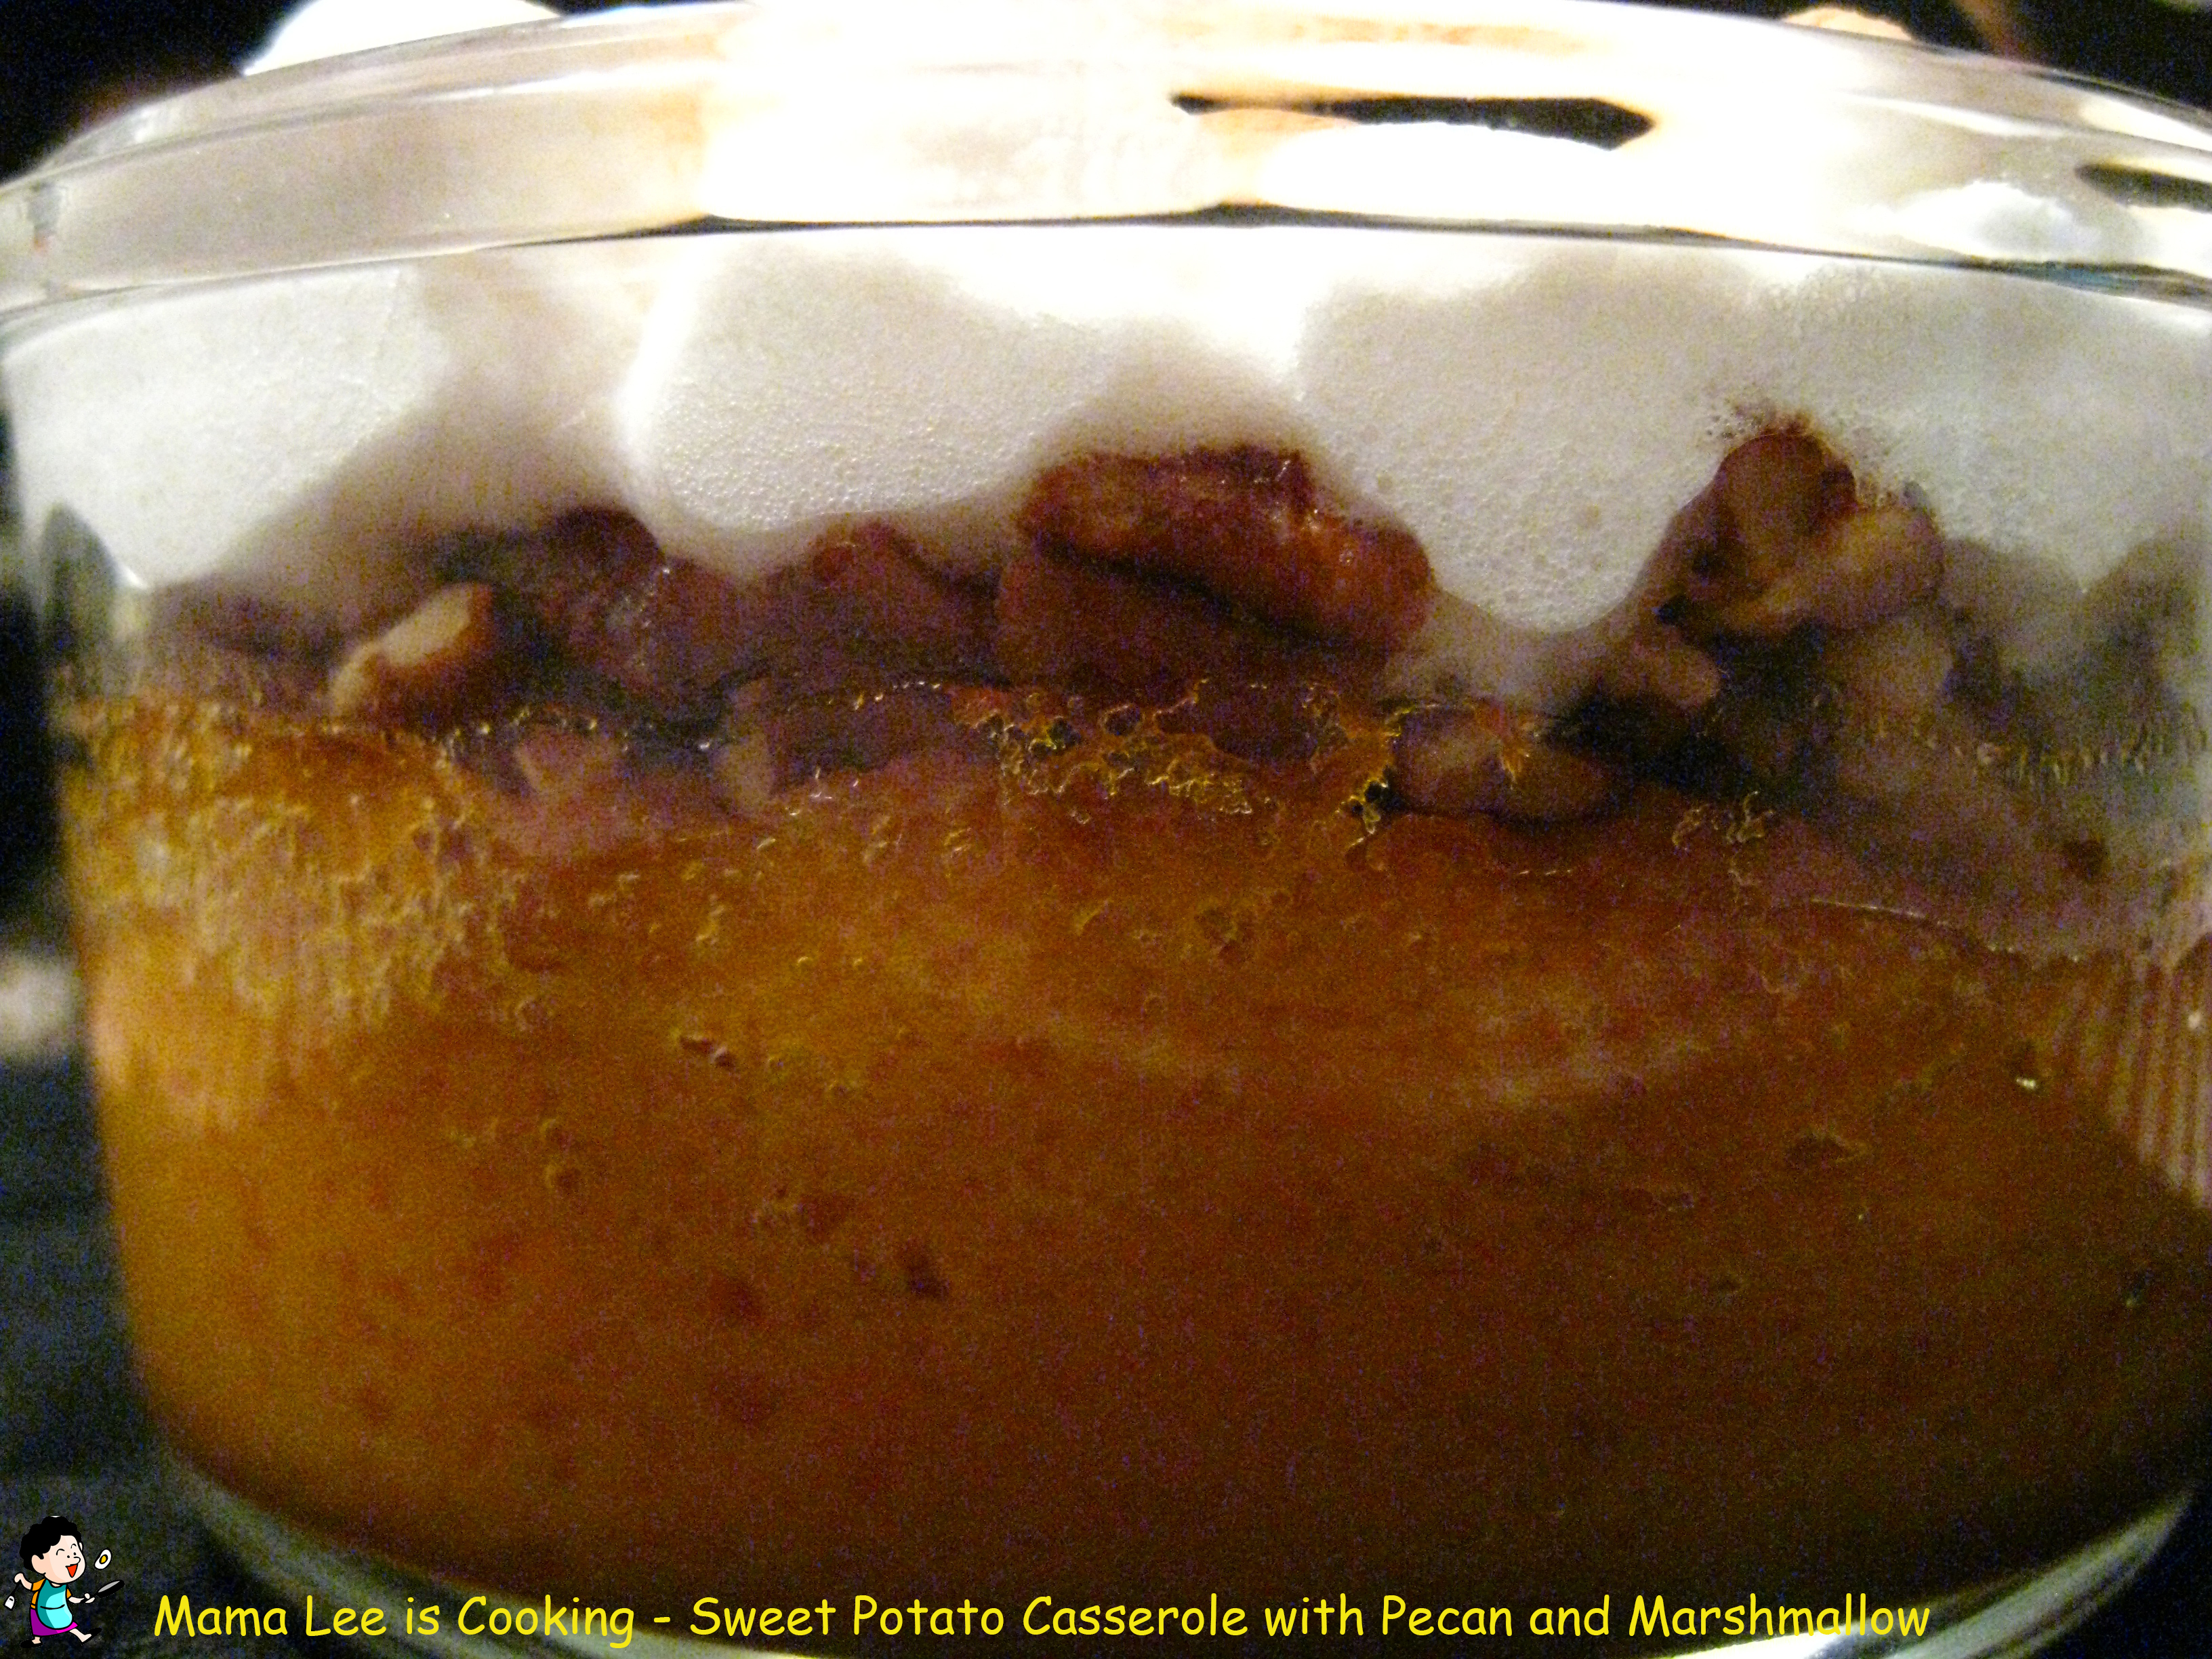 Sweet Potato Casserole with Pecan and Marshmallow